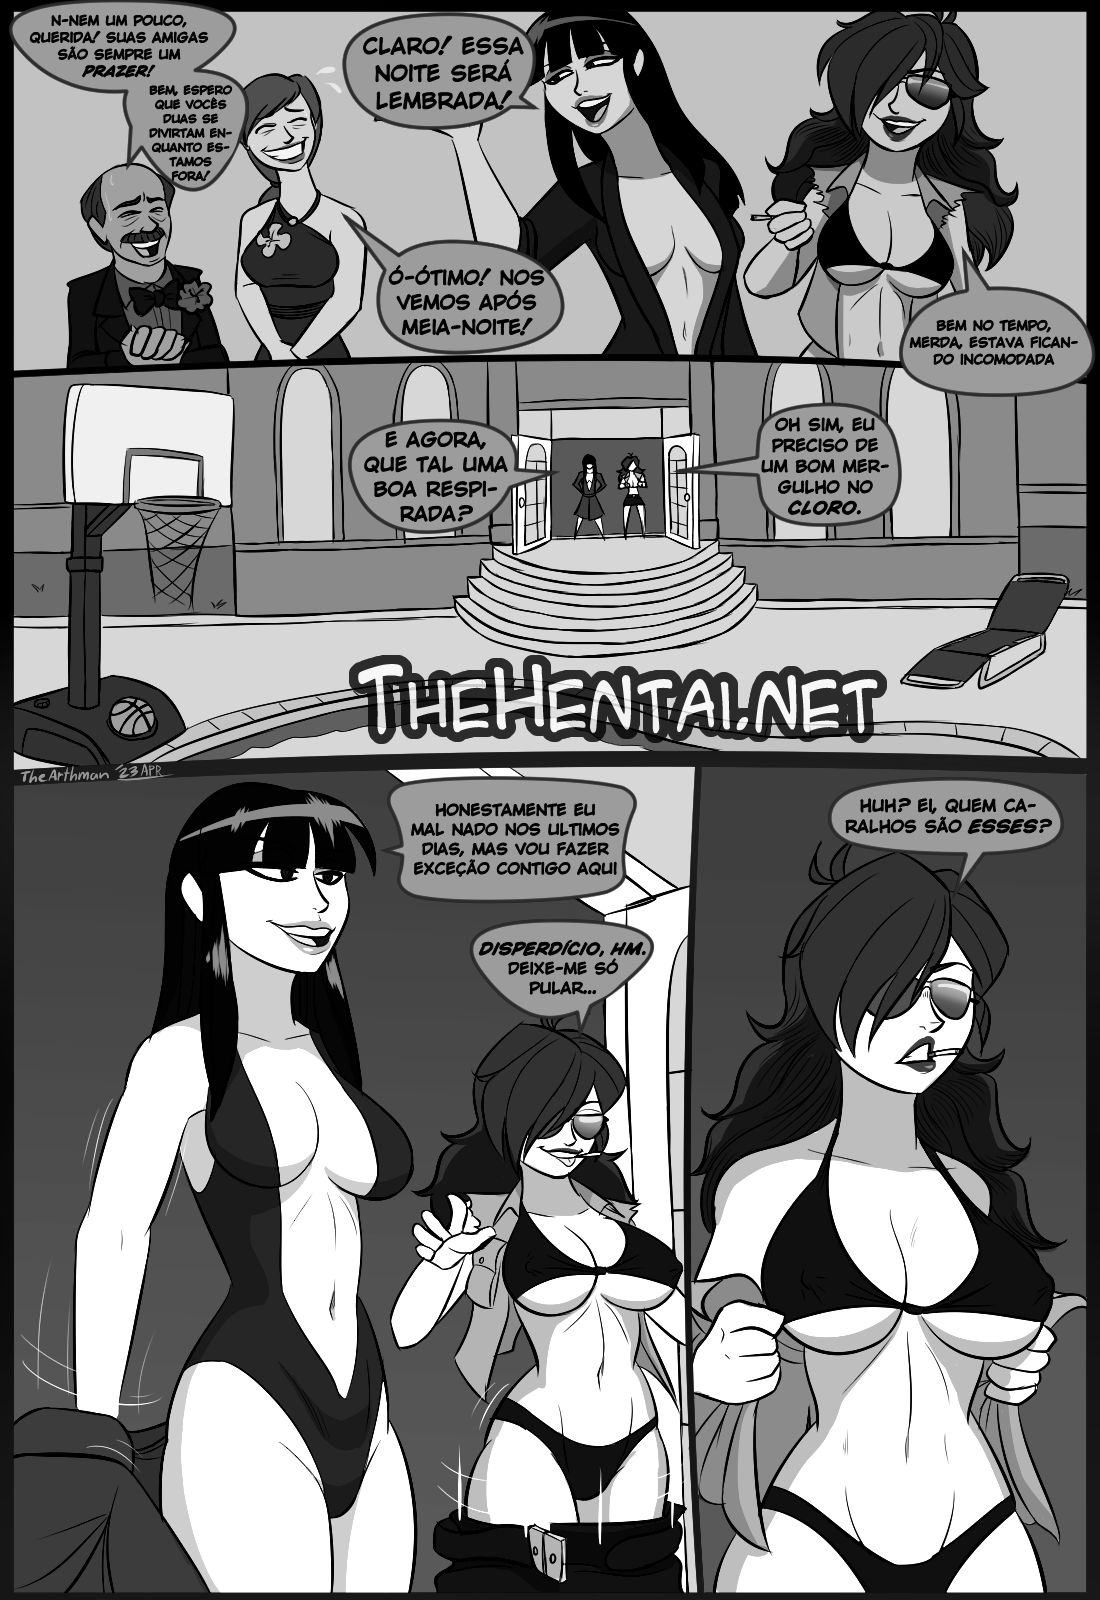 Dirtwater - Chapter 7 - Path of Sin Hentai pt-br 09